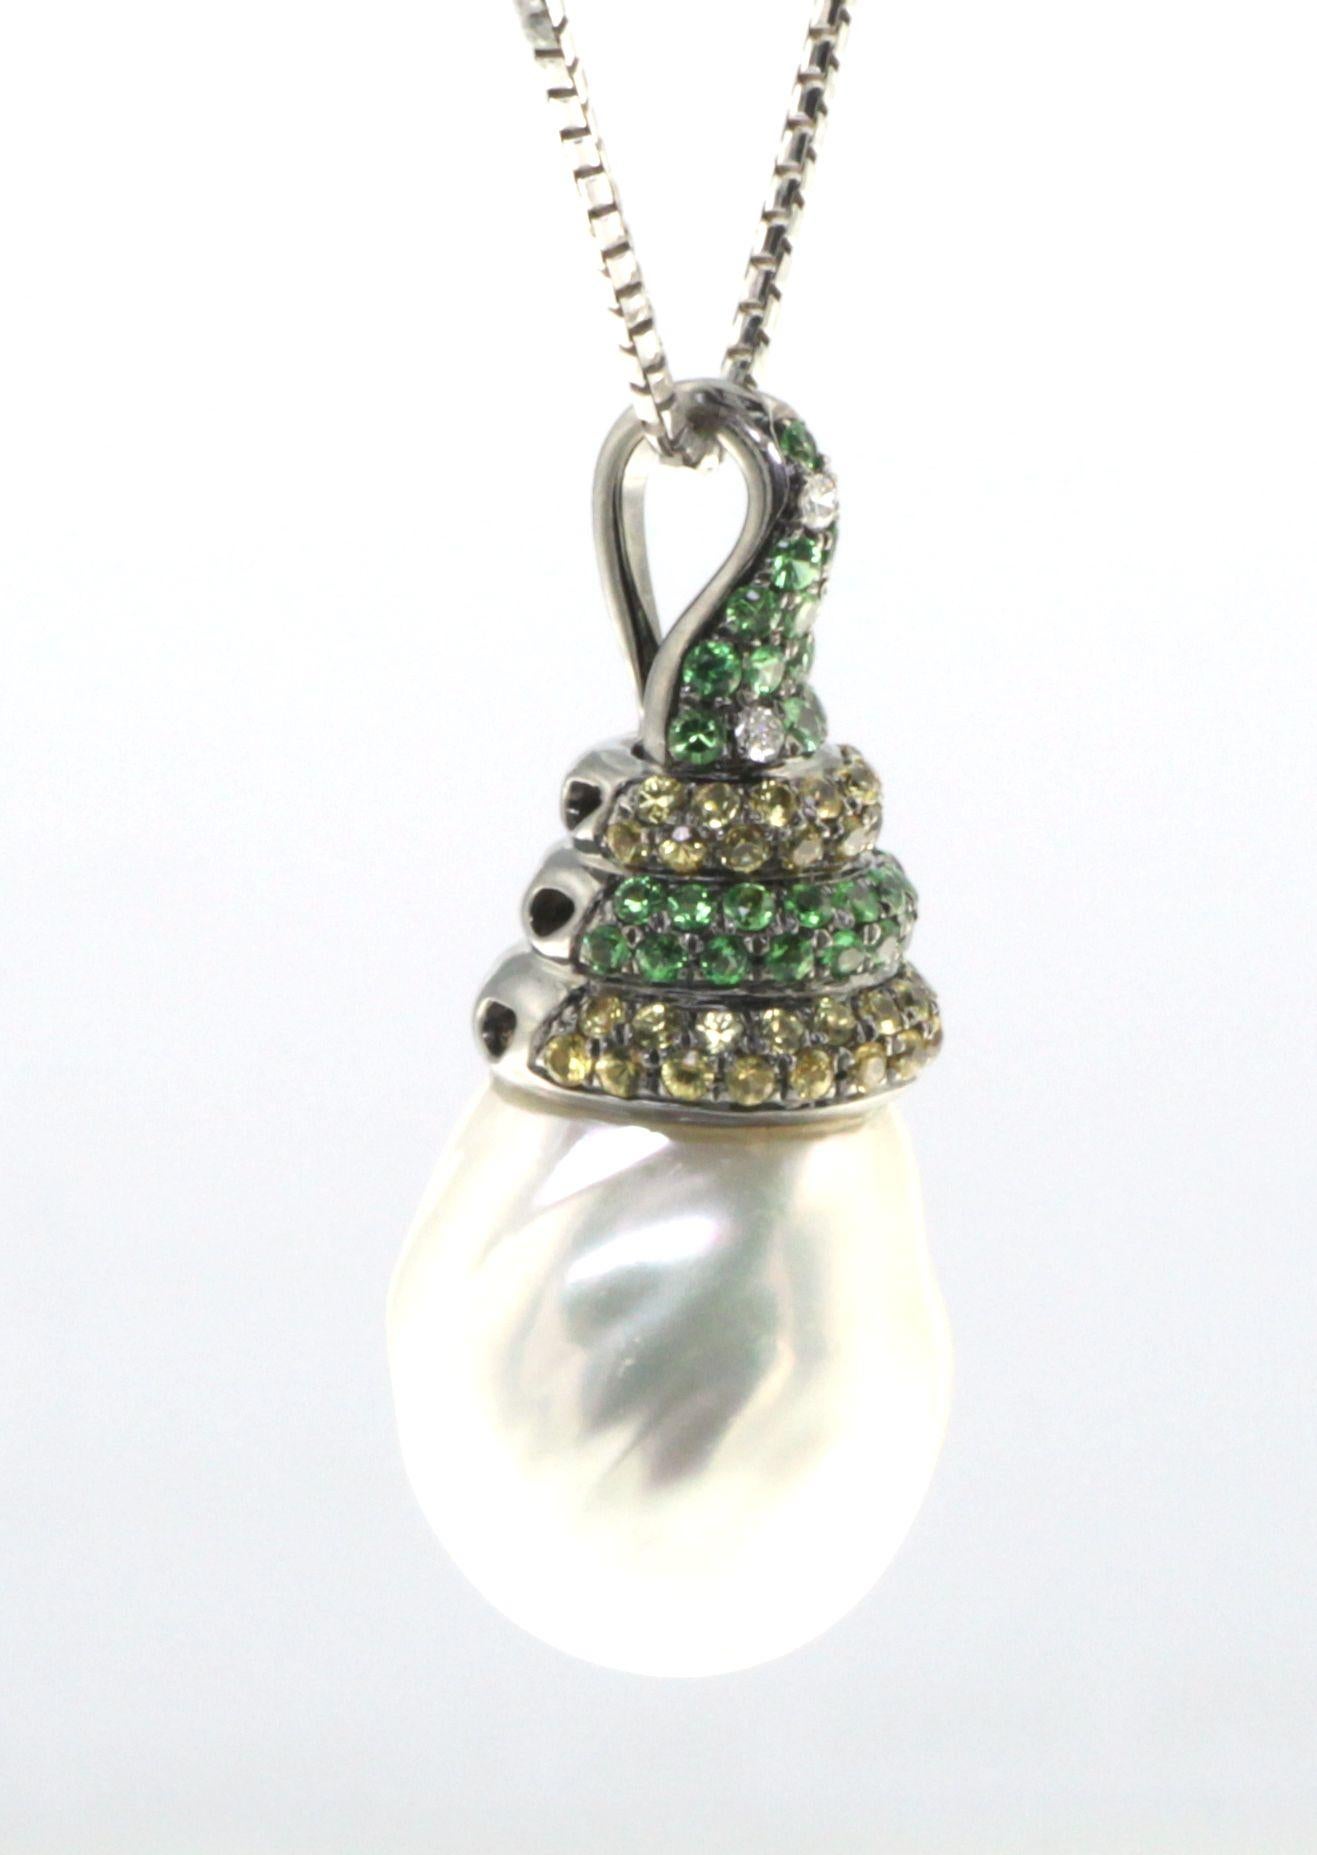 This pendant is an exquisite piece that features a baroque South Sea pearl, full of character and natural beauty. The 15mm pearl, with its distinctive irregular shape and captivating luster, is a testament to the unique allure that only a baroque